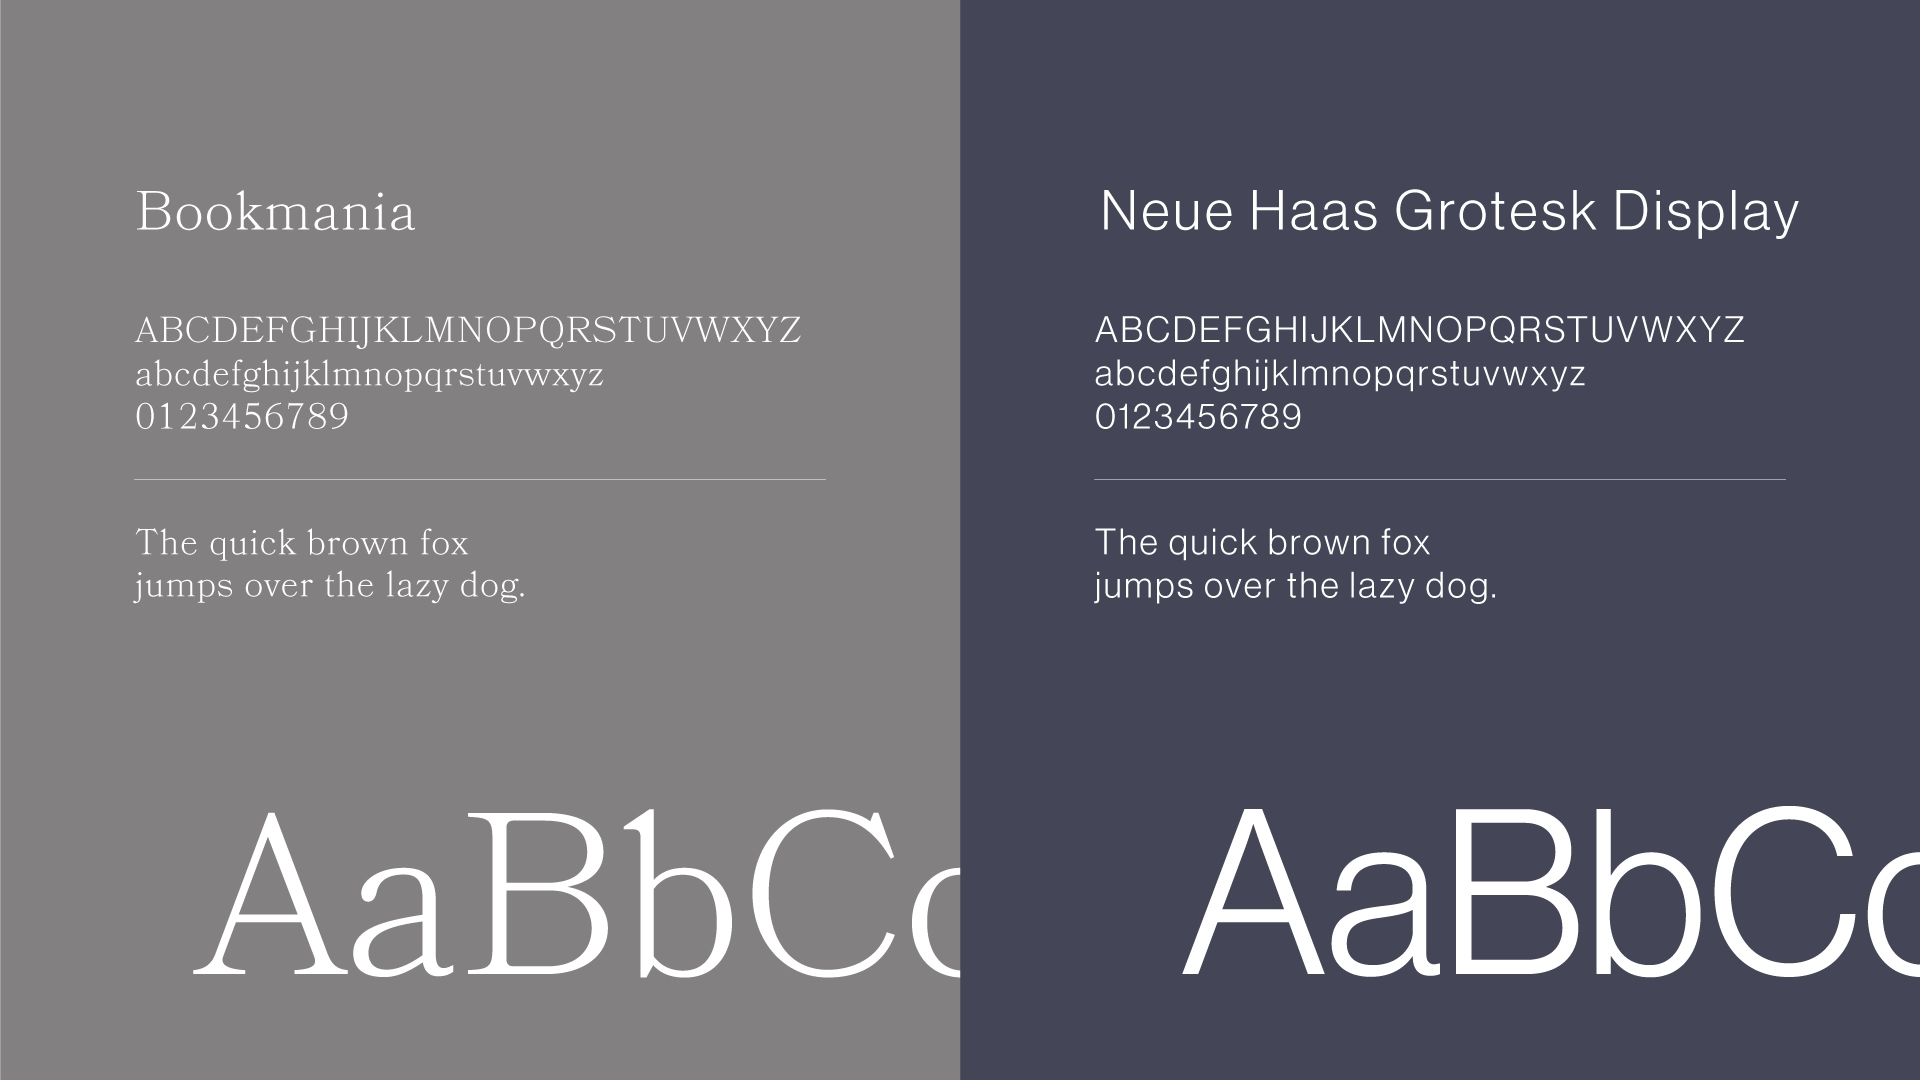 Typefaces: Bookmania and Neue Haas Grotesk Display